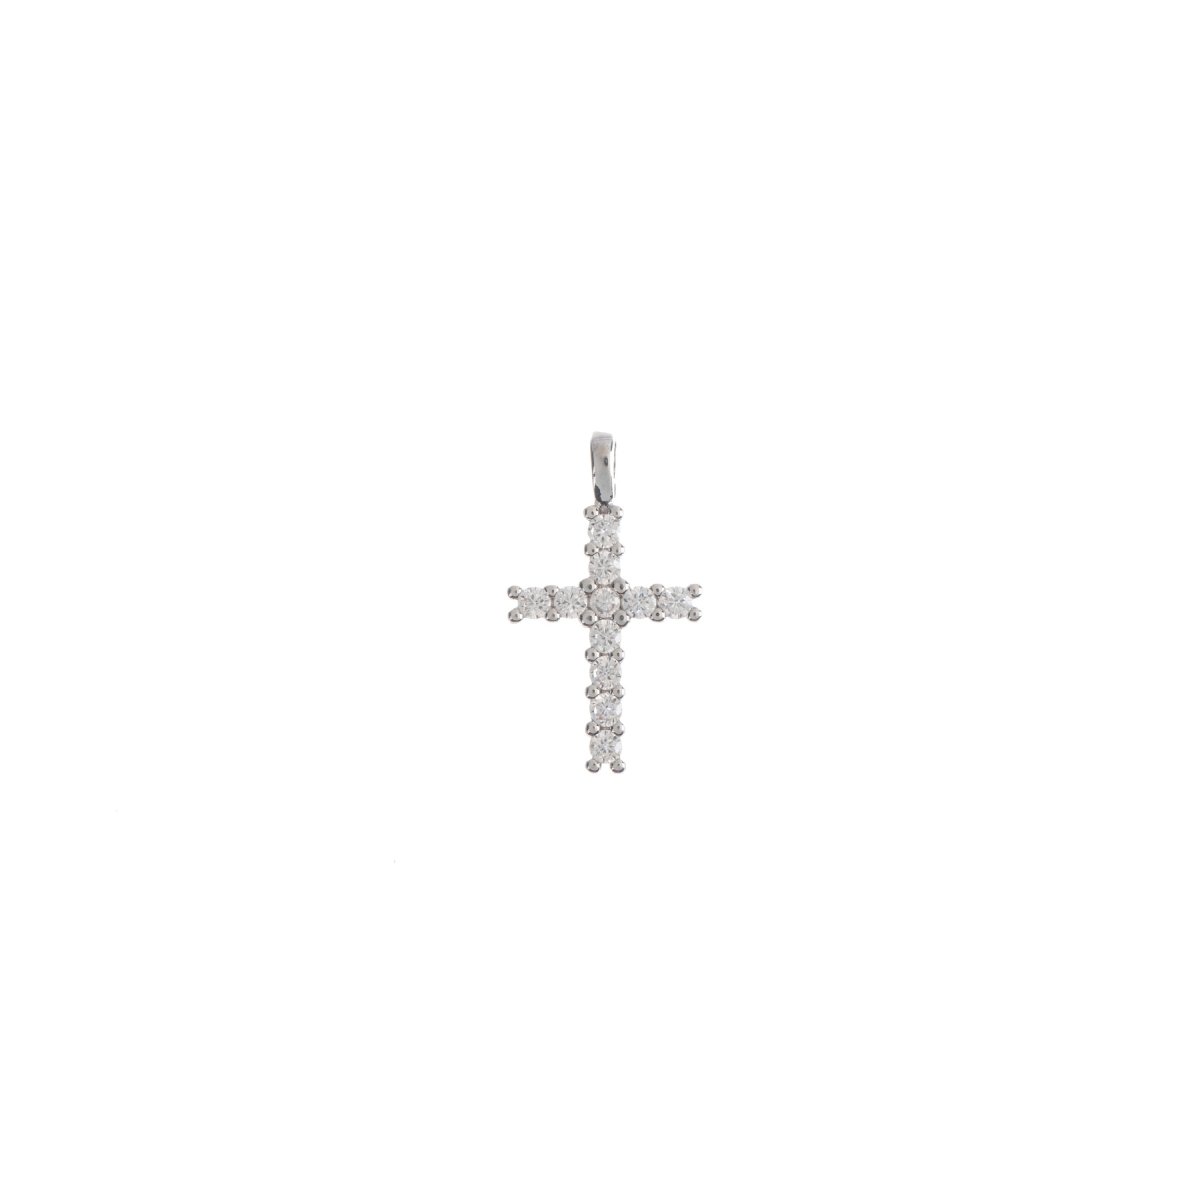 Dainty 14K White Gold Fill Cross CZ Cubic Zircon Pendant Charm 23mmx14mm for necklace Religious Jewelry Making, CL-C244 - DLUXCA